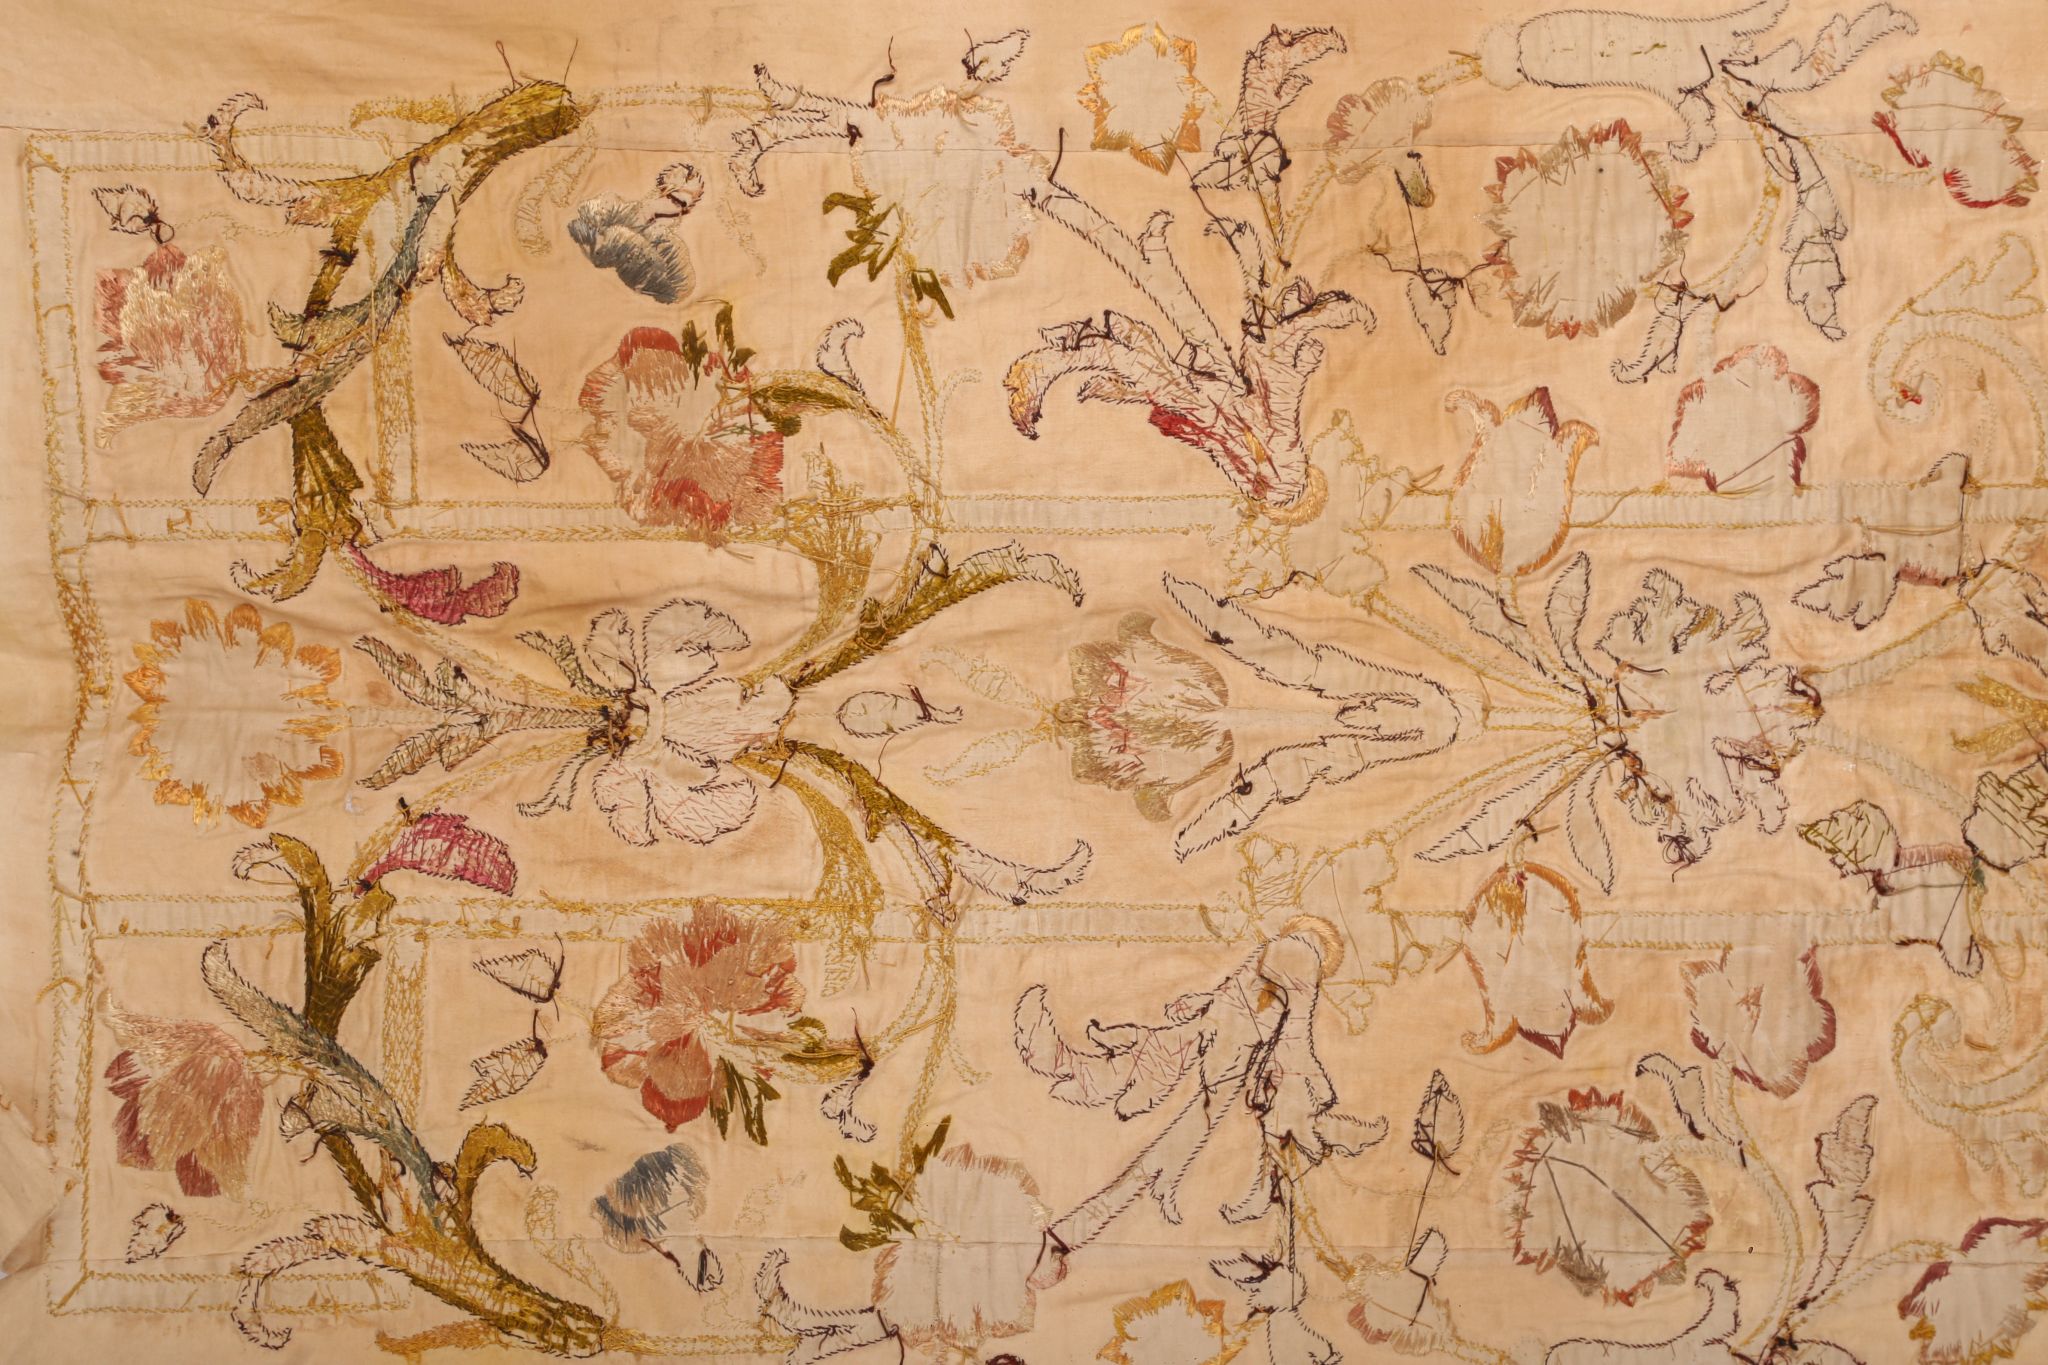 A LARGE 17TH CENTURY SPANISH EMBROIDERED PANEL WORKED IN COLOURED SILKS ON LINEN DEPICTING PARROTS - Image 5 of 7